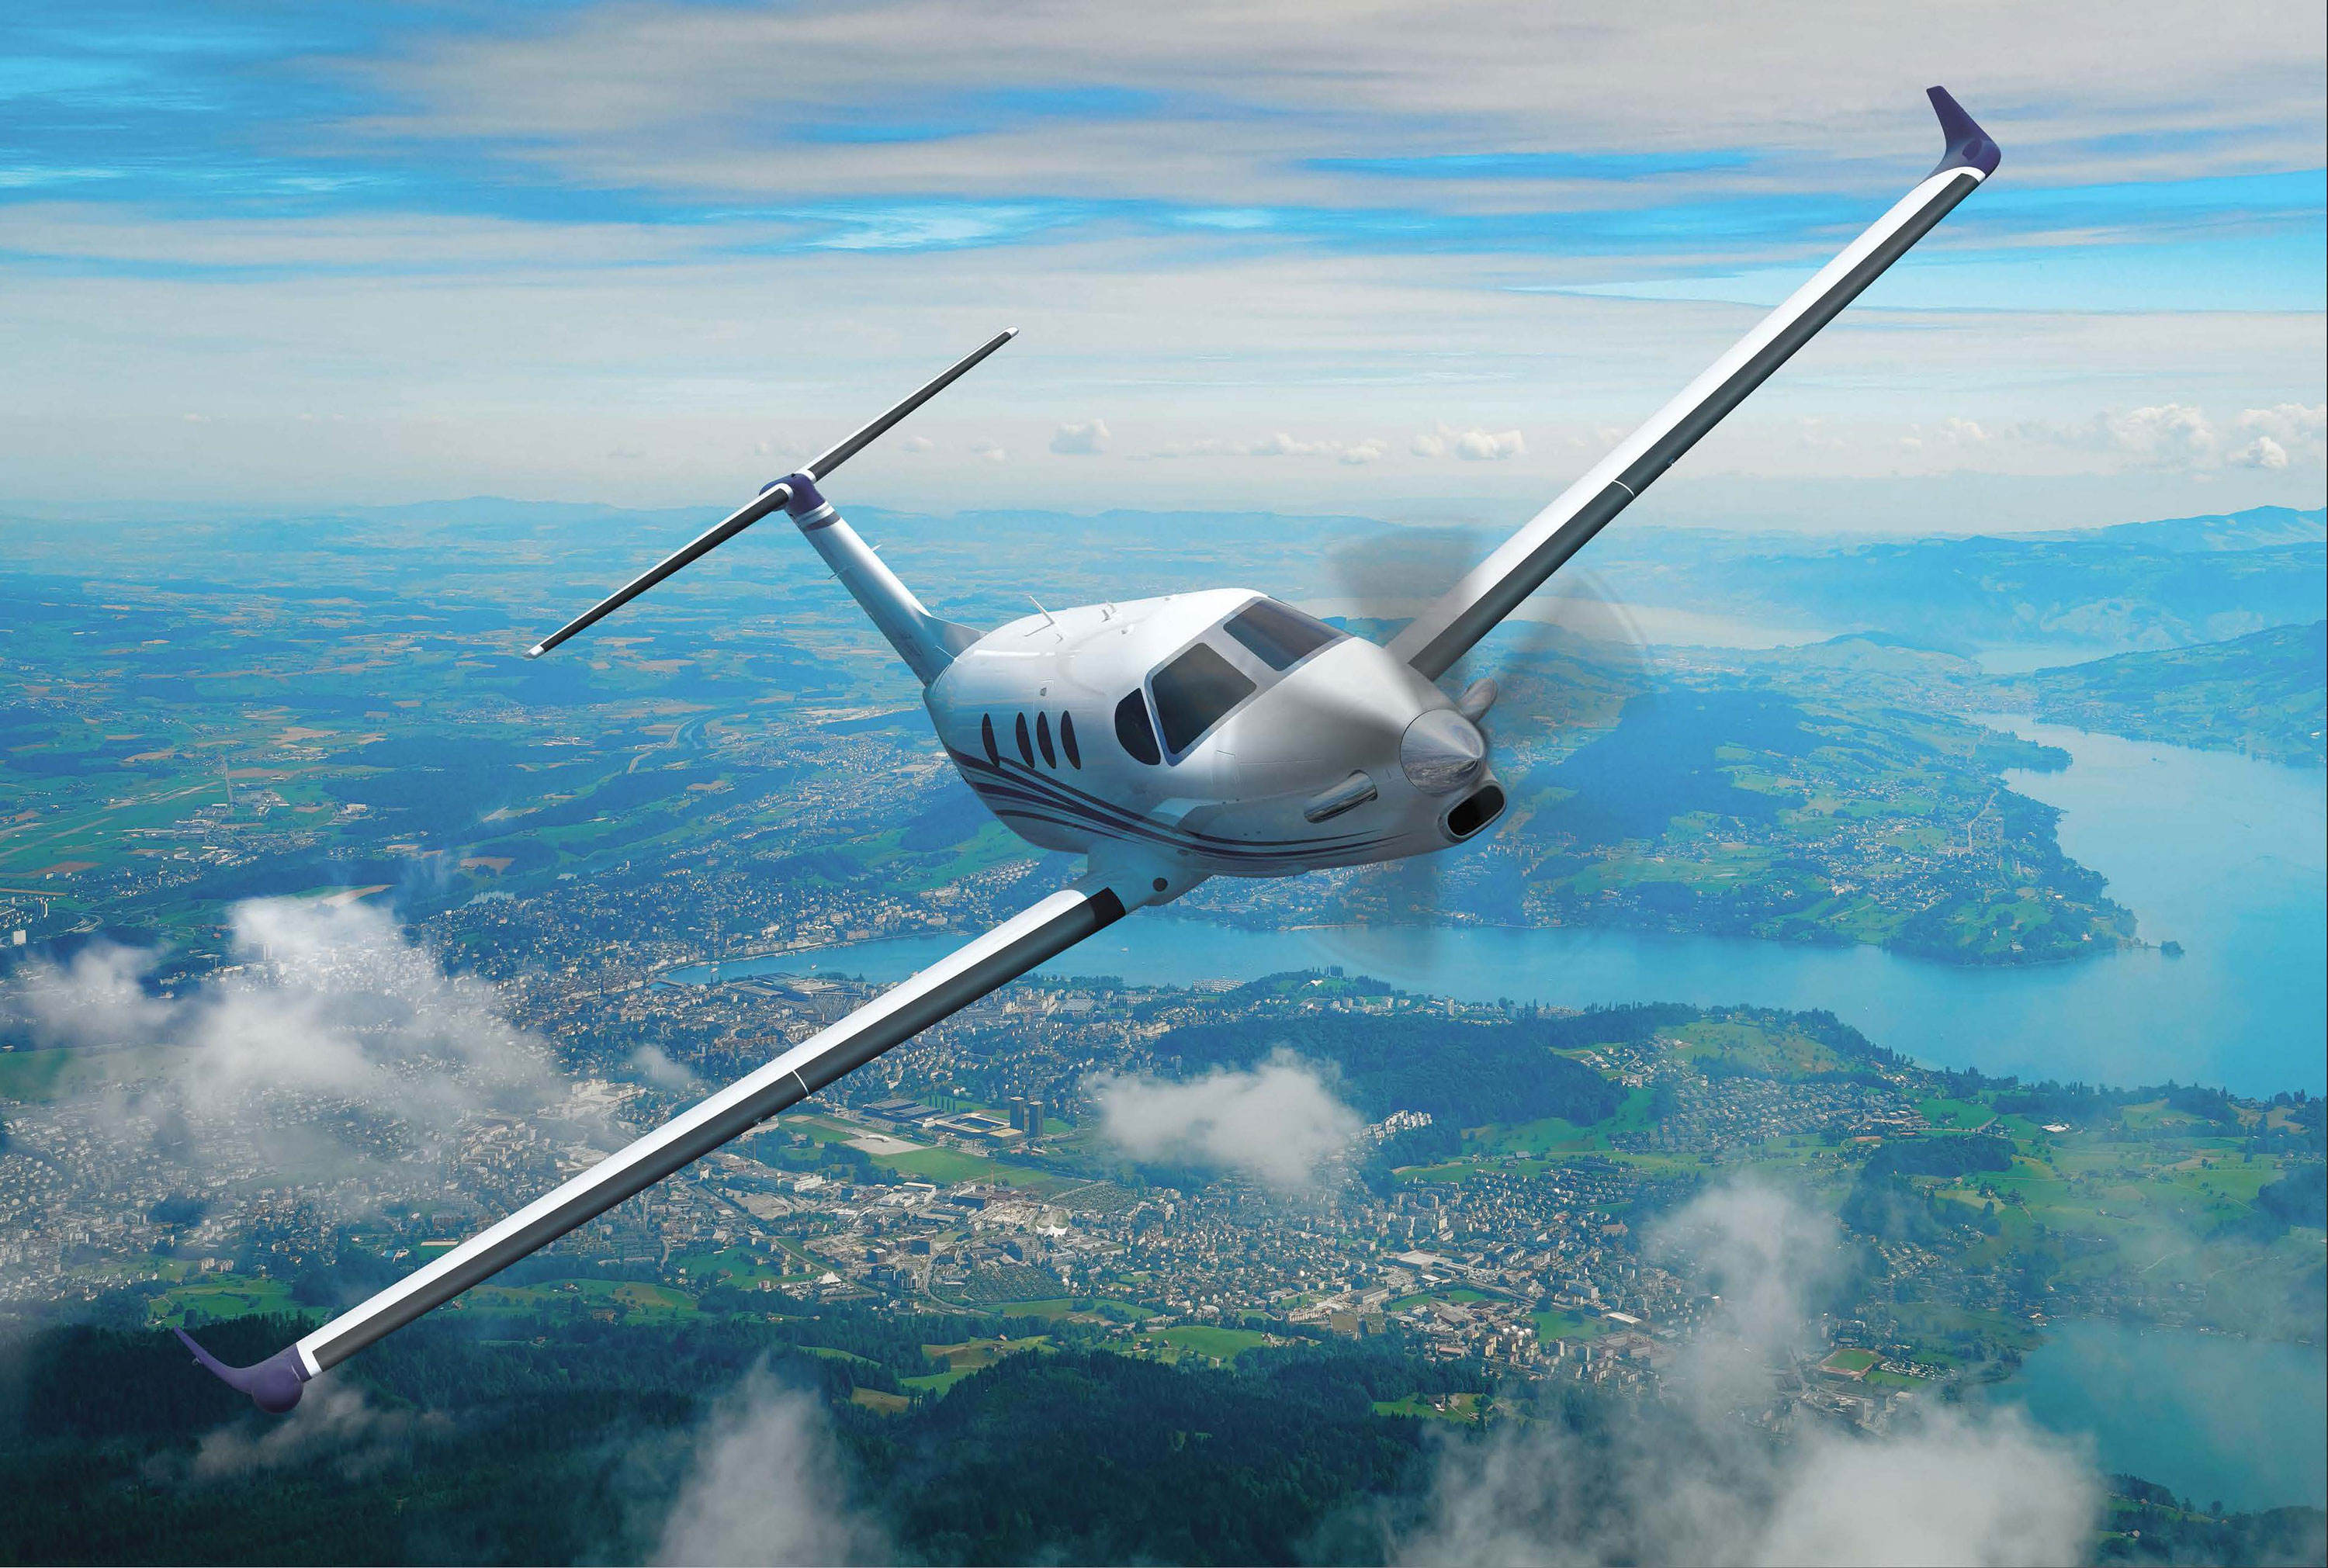 Textron Aviation to debut new full-scale Cessna Denali mockup at EAA AirVenture 2018 | The JetAv Blog